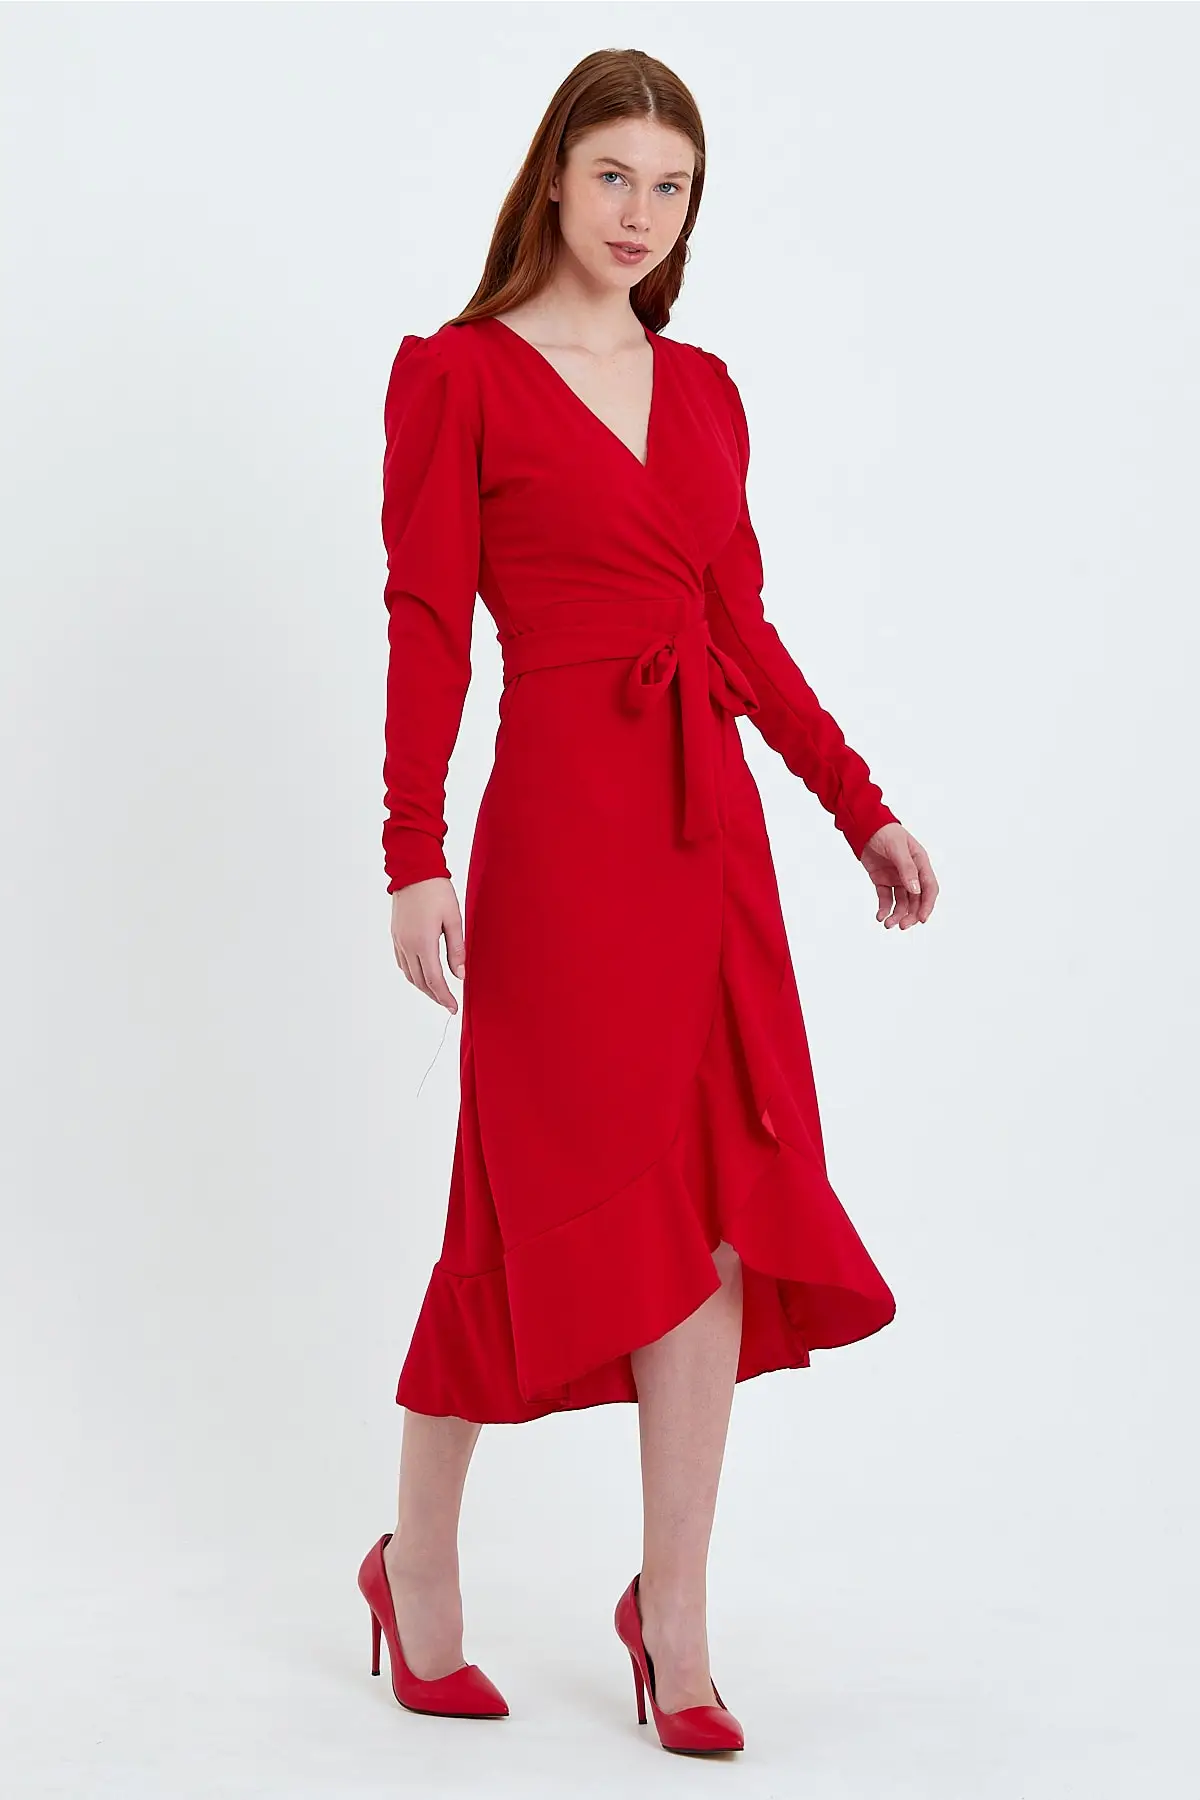 Crepe Fabric Midi Boy with Belted, Flirbed Red Dress Long Textured Double-Breasted Collar Polyester Sleeve Design Medium Wear